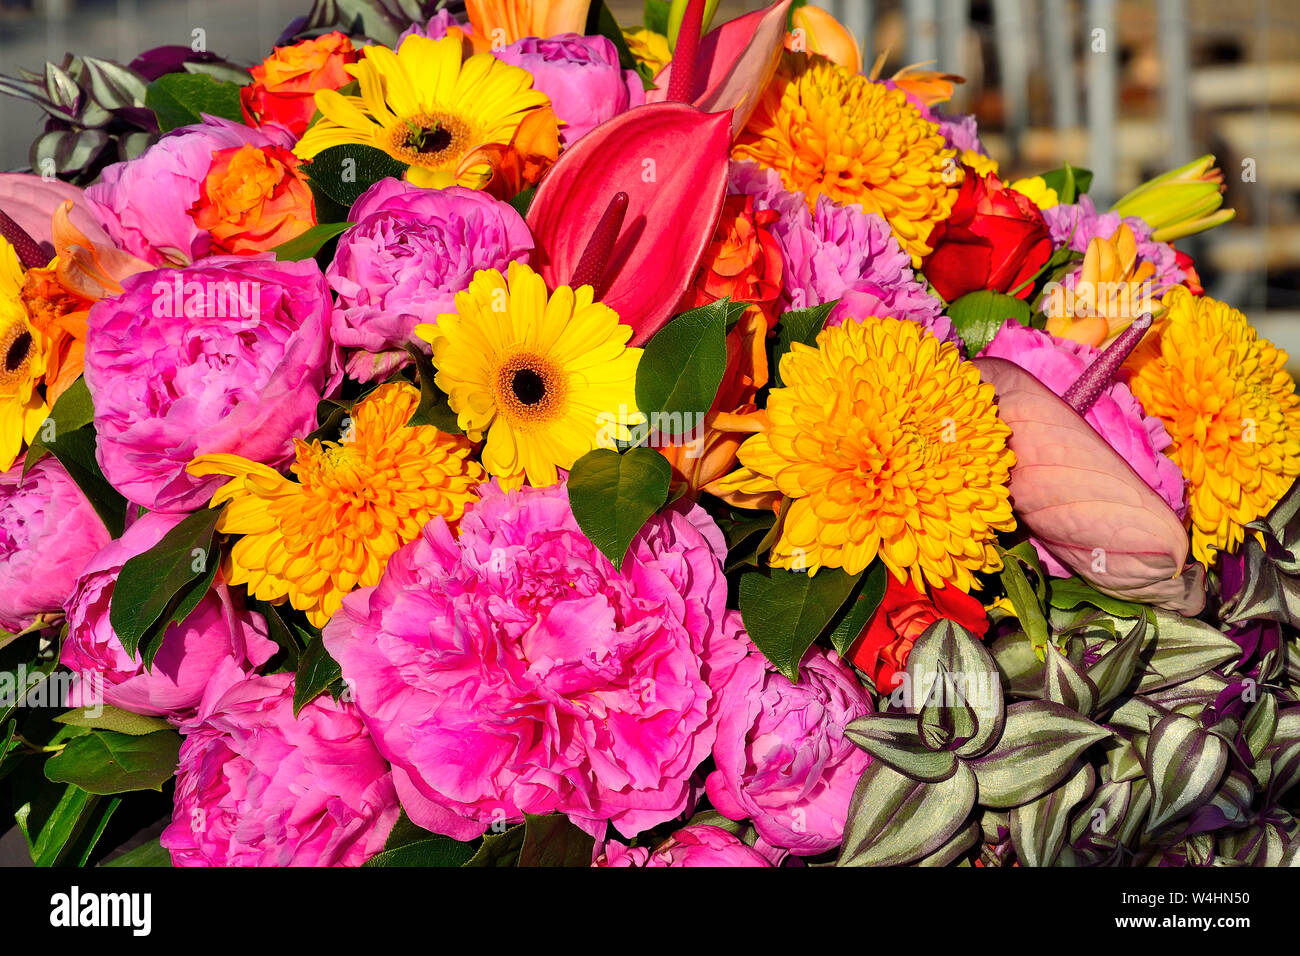 Bright joyful festive multicolor floral background from different flowers in pink, yellow and red colors and variegated leaves of Tradescantia decorat Stock Photo